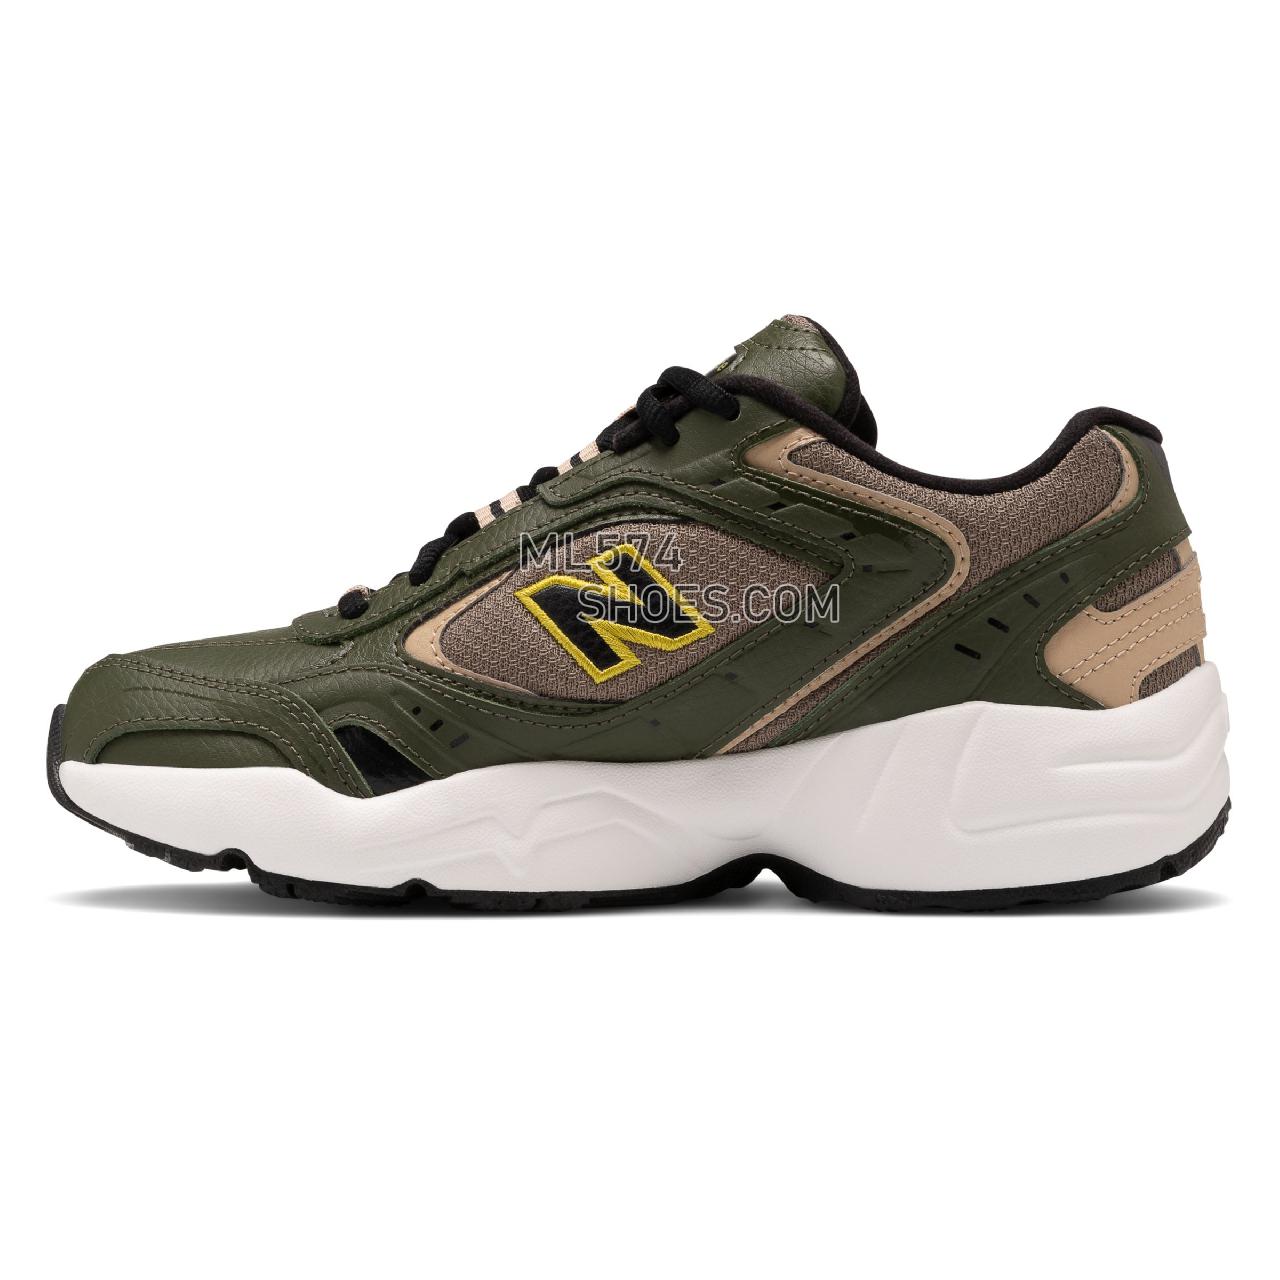 New Balance 452 - Women's 452 Training - Dark Covert Green with Incense and Black - WX452SO